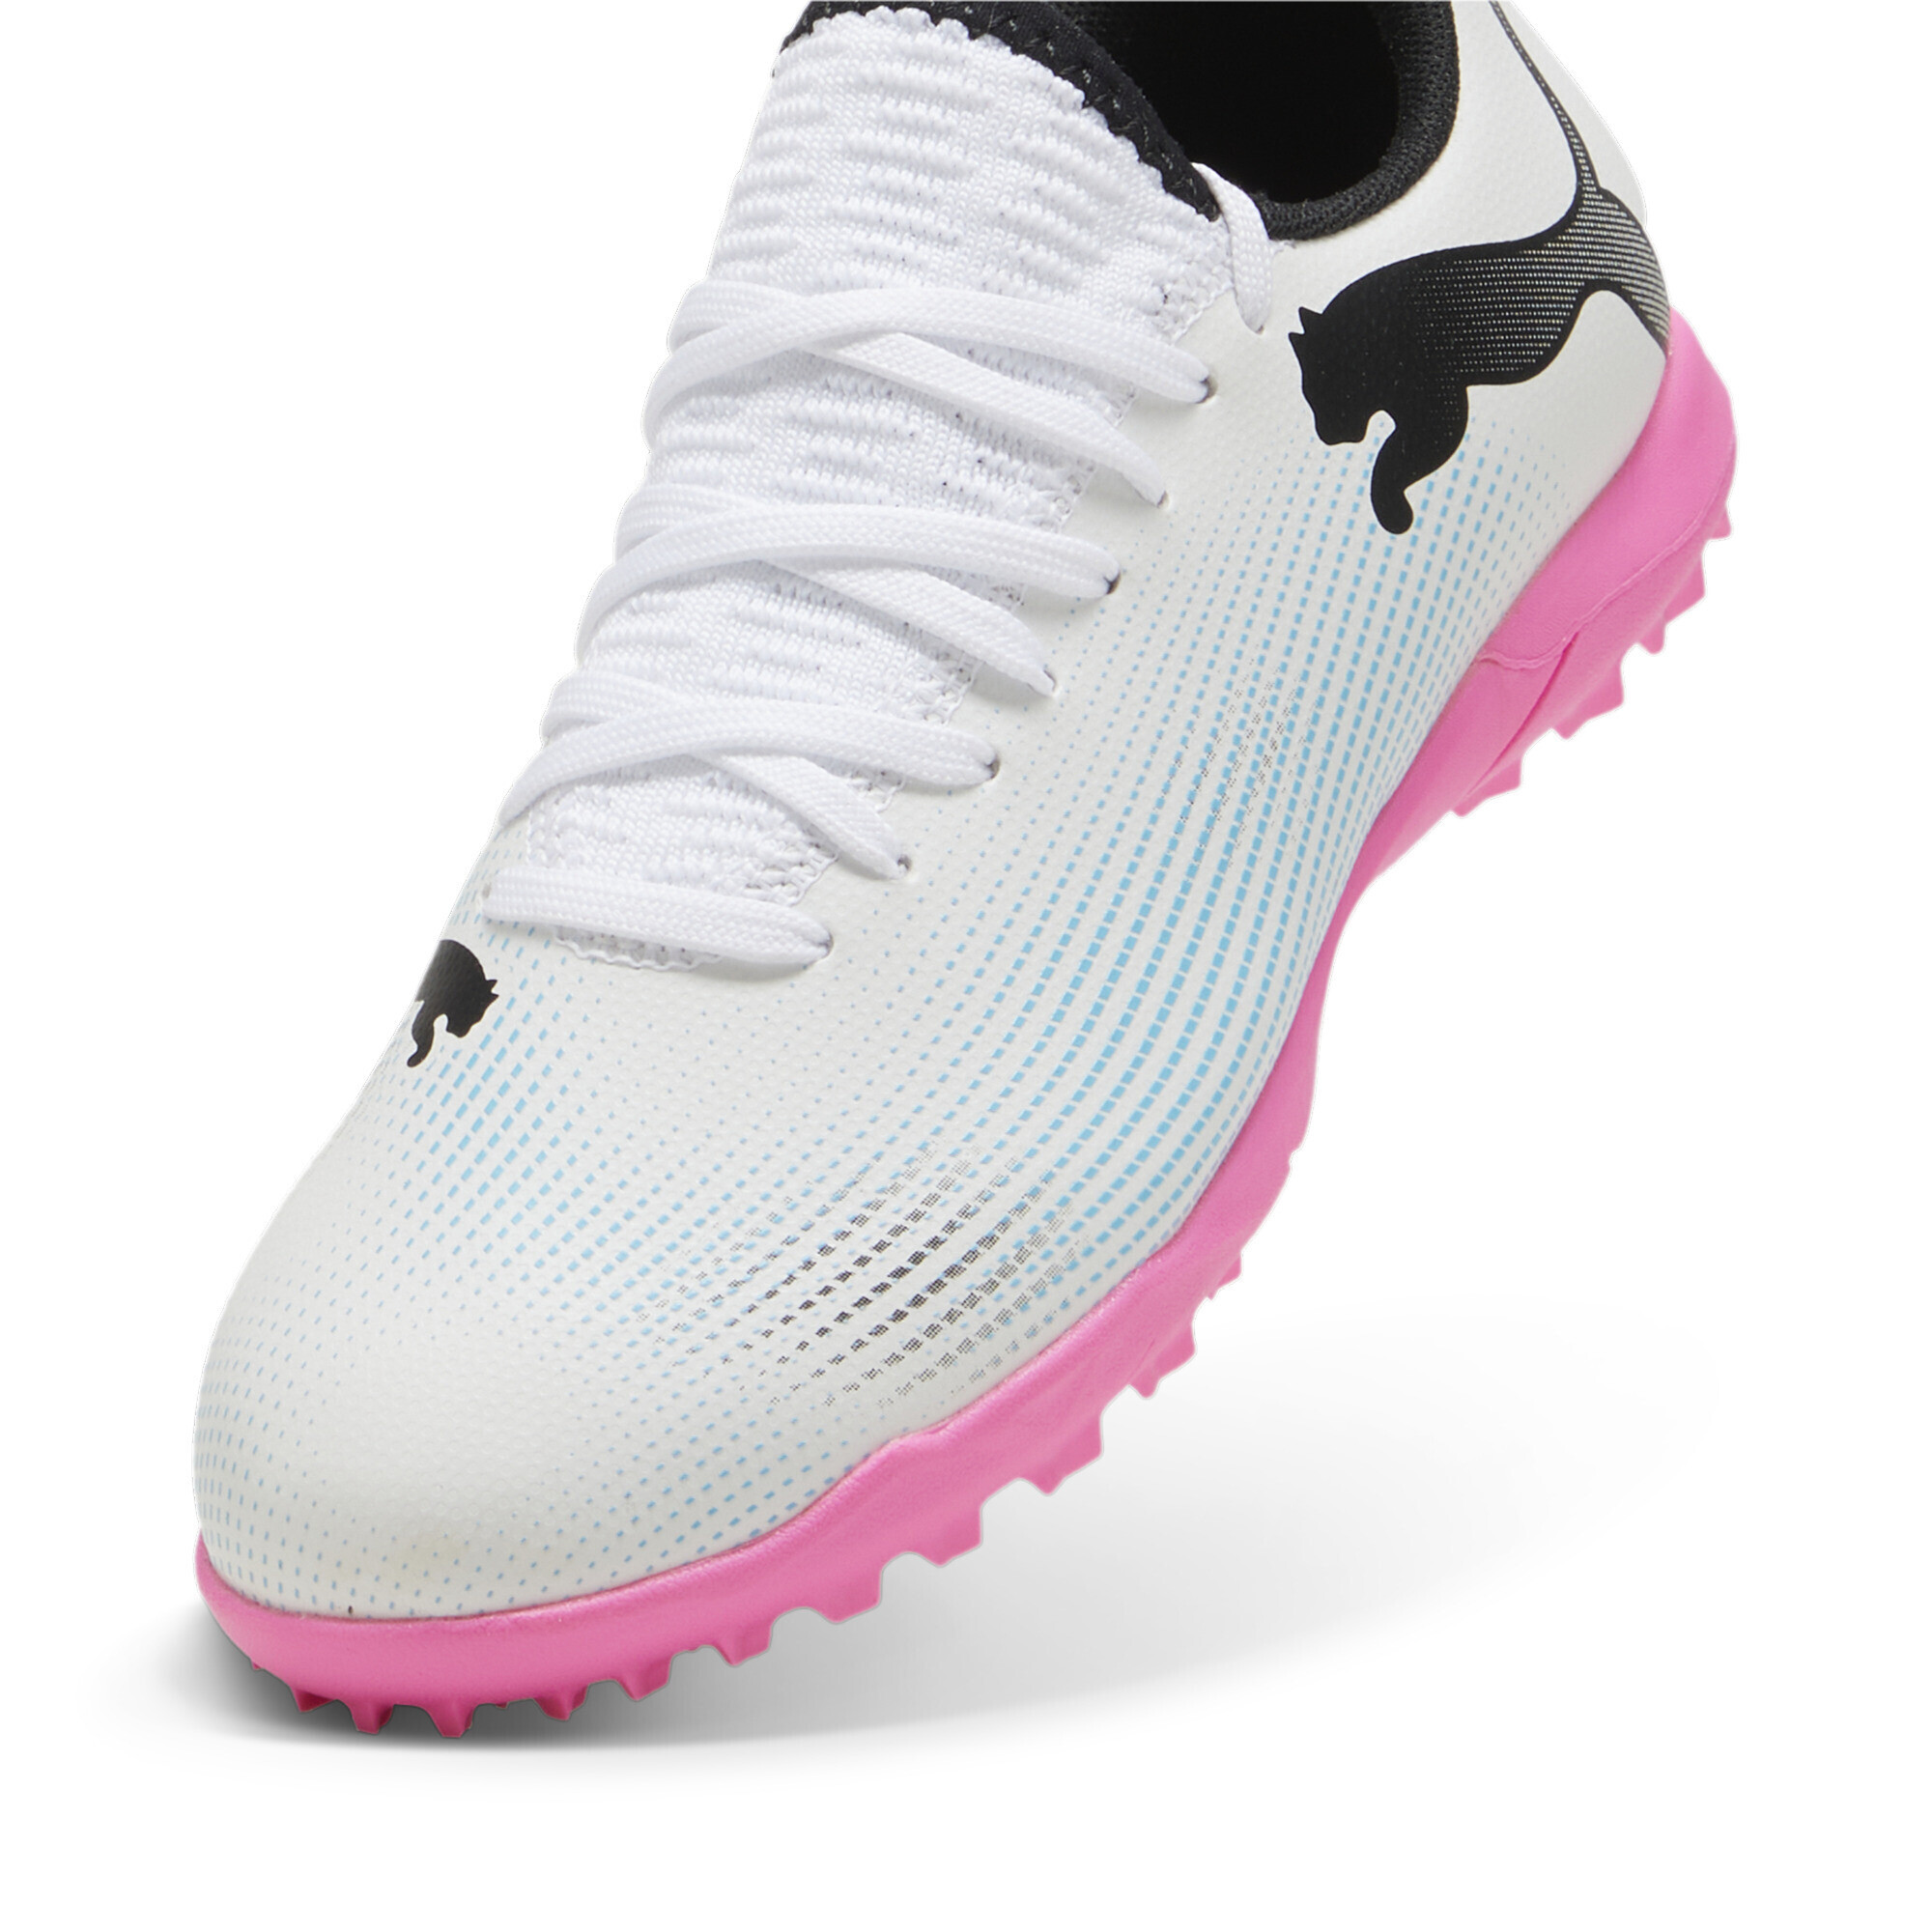 PUMA FUTURE 7 PLAY TT Youth Football Boots In White/Pink, Size EU 38